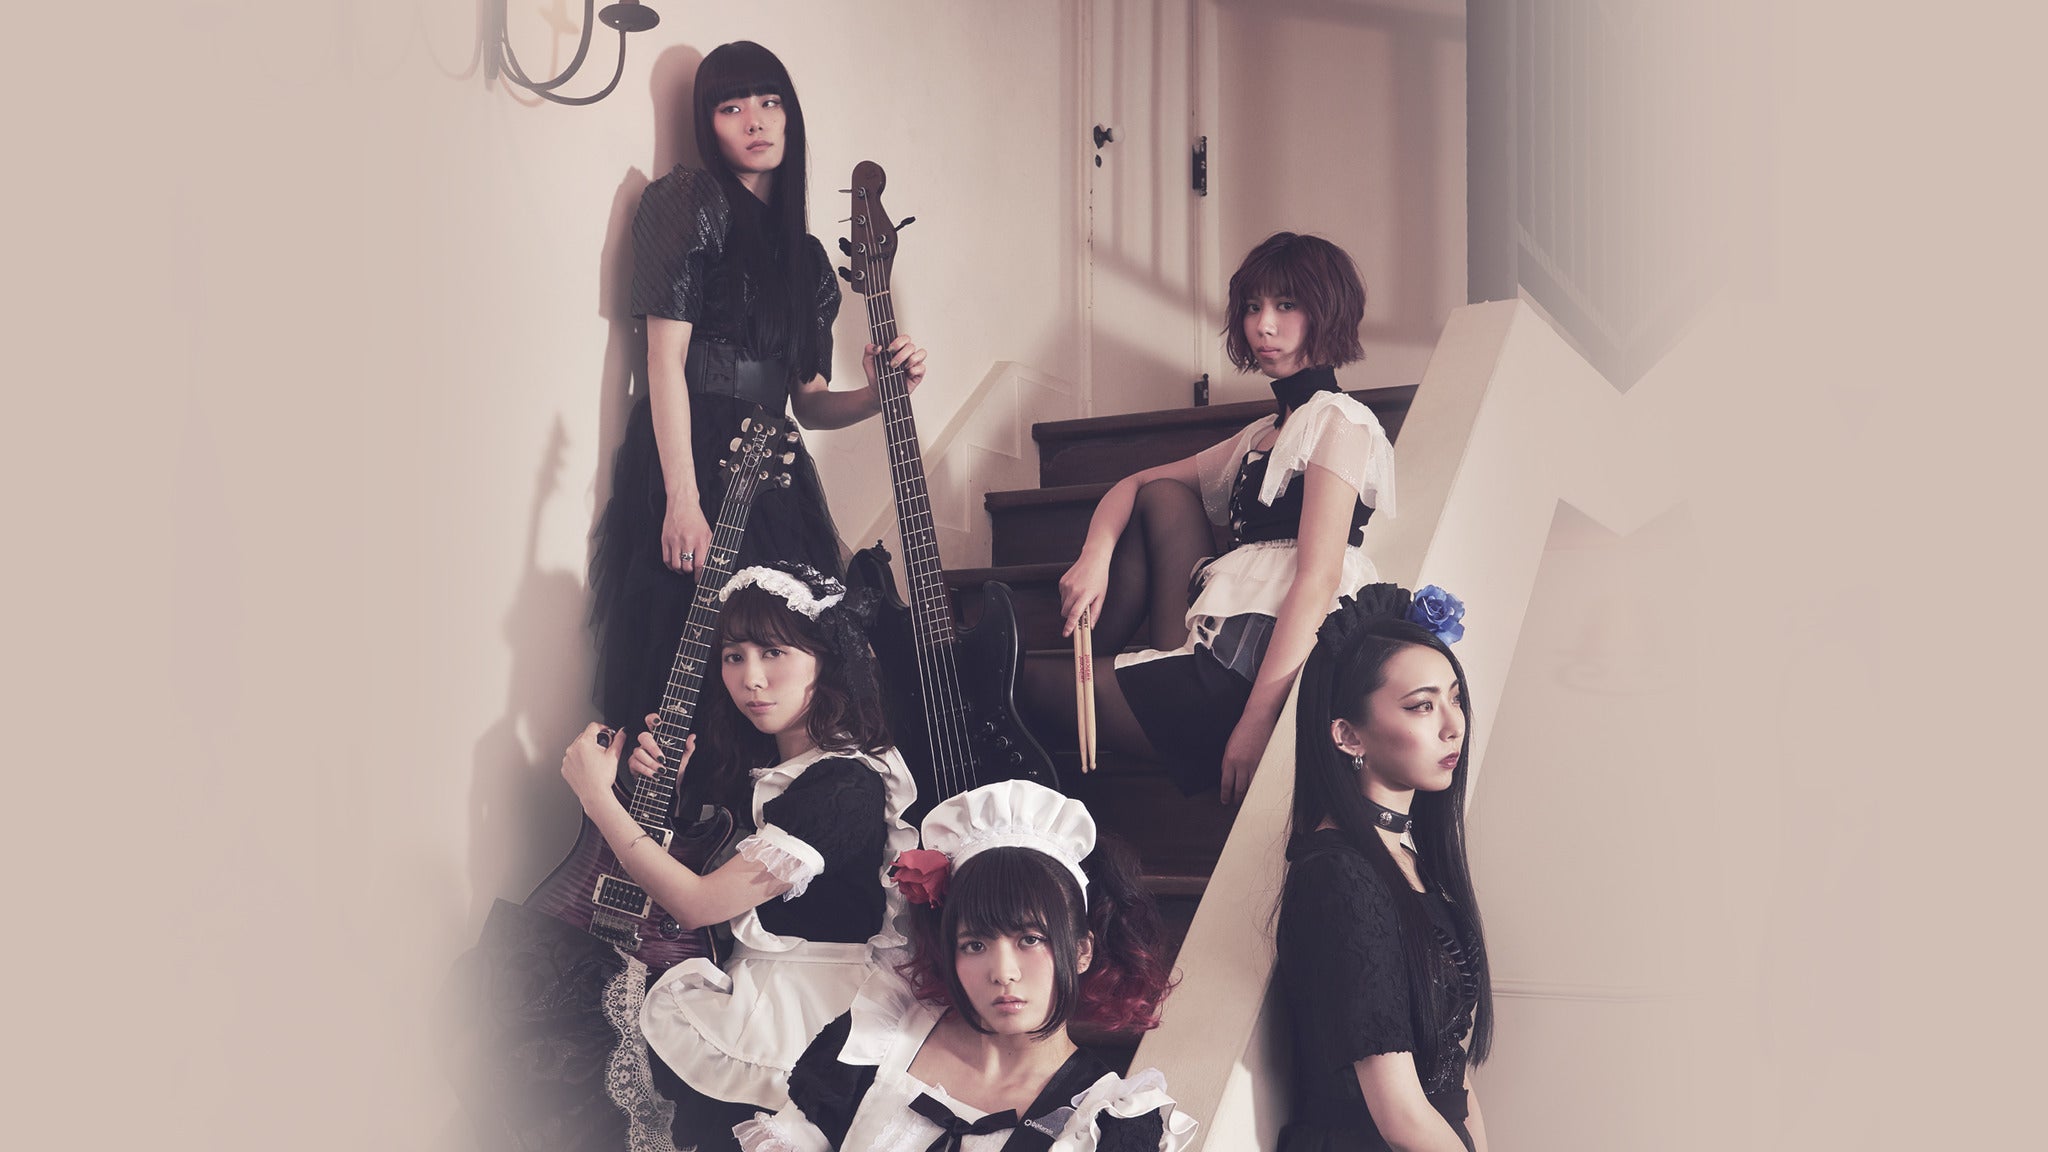 BAND-MAID WORLD DOMINATION TOUR 2019 ~gekidou~ in New York promo photo for Citi® Cardmember Preferred presale offer code